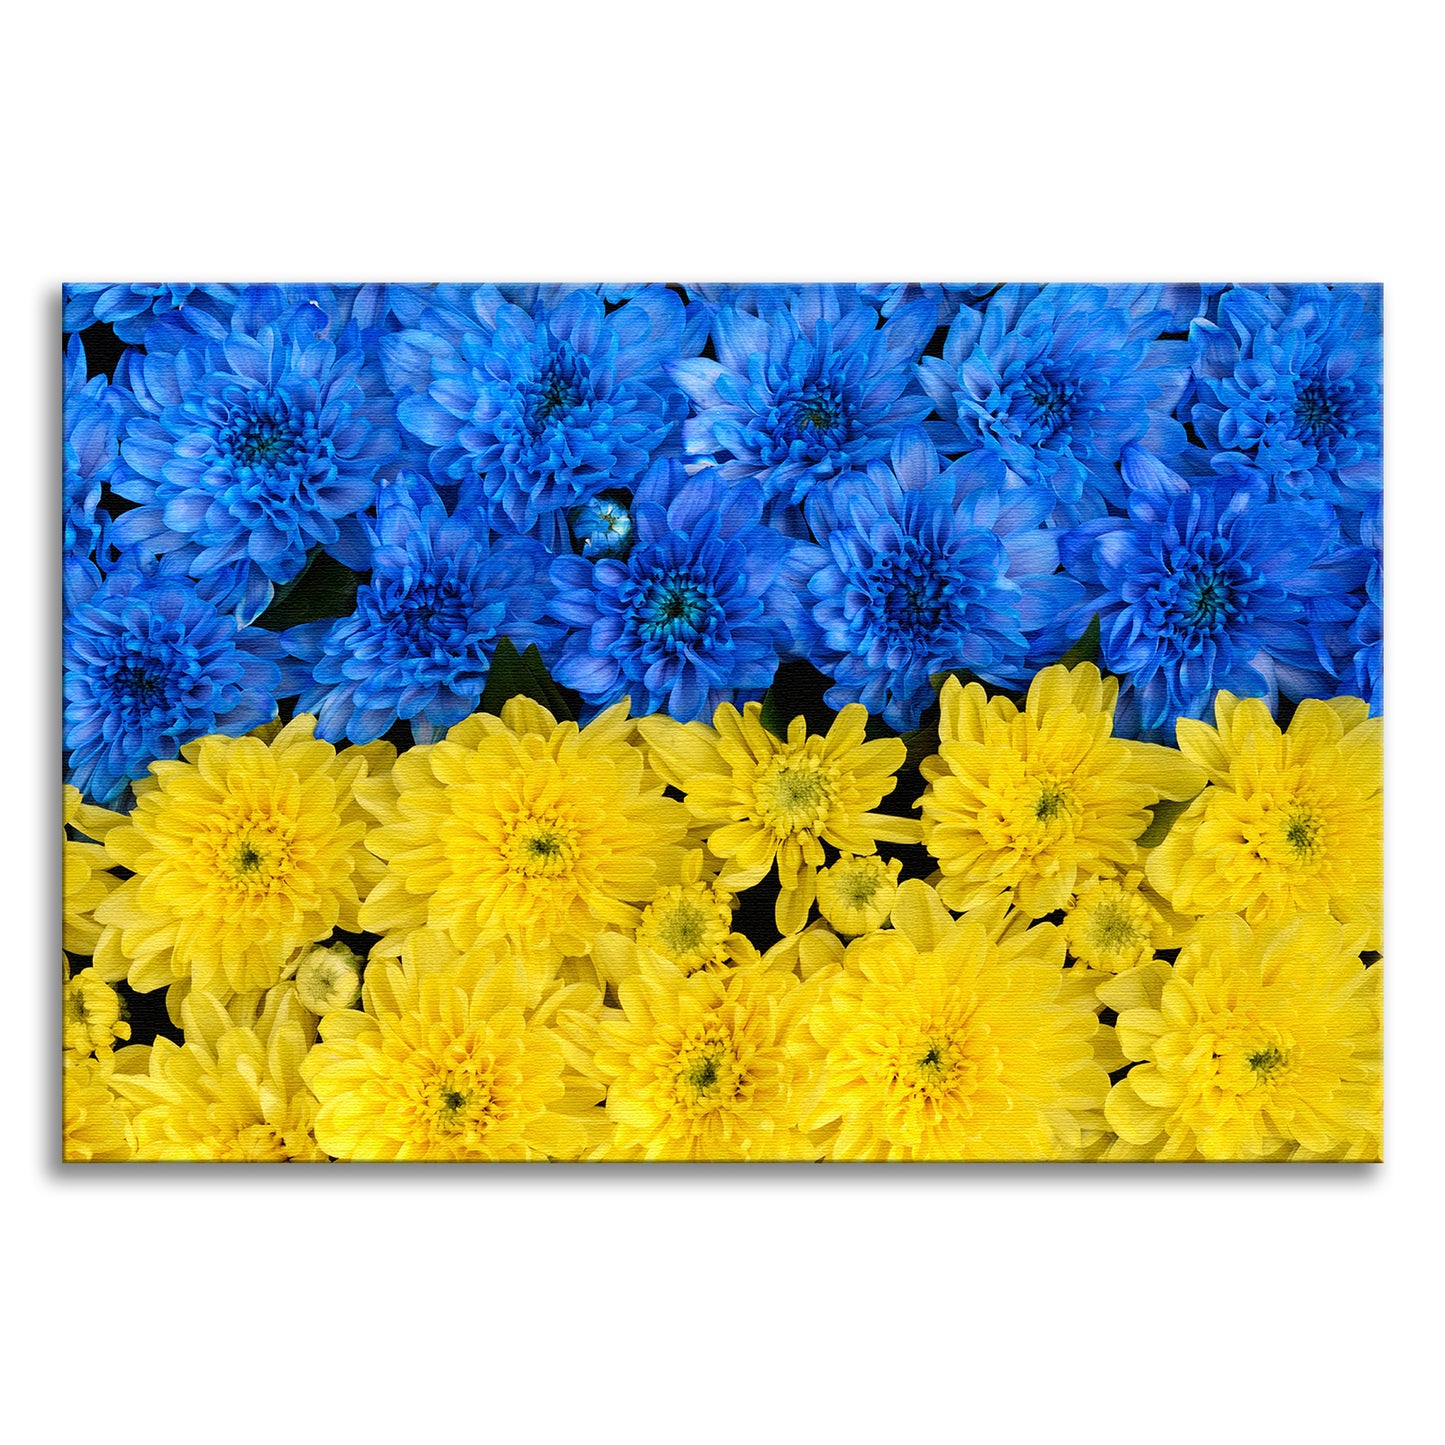 Blue and Yellow Chrysanthemums For Ukraine Refugees Nature Photo Canvas Wall Art Print